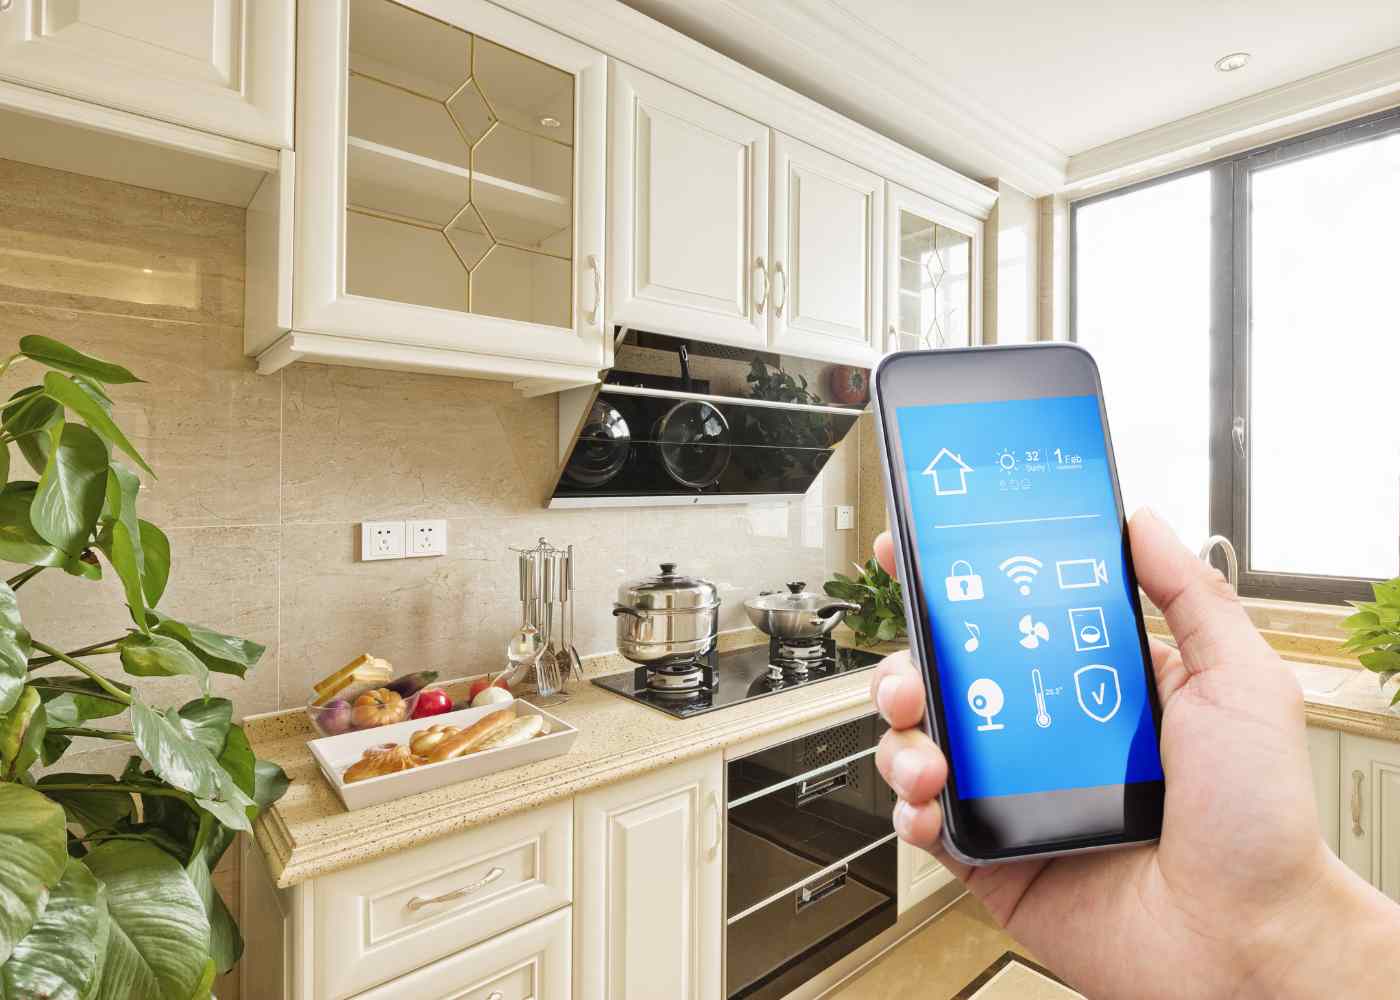 How Smart Kitchen Appliances Are Revolutionizing Home Cooking